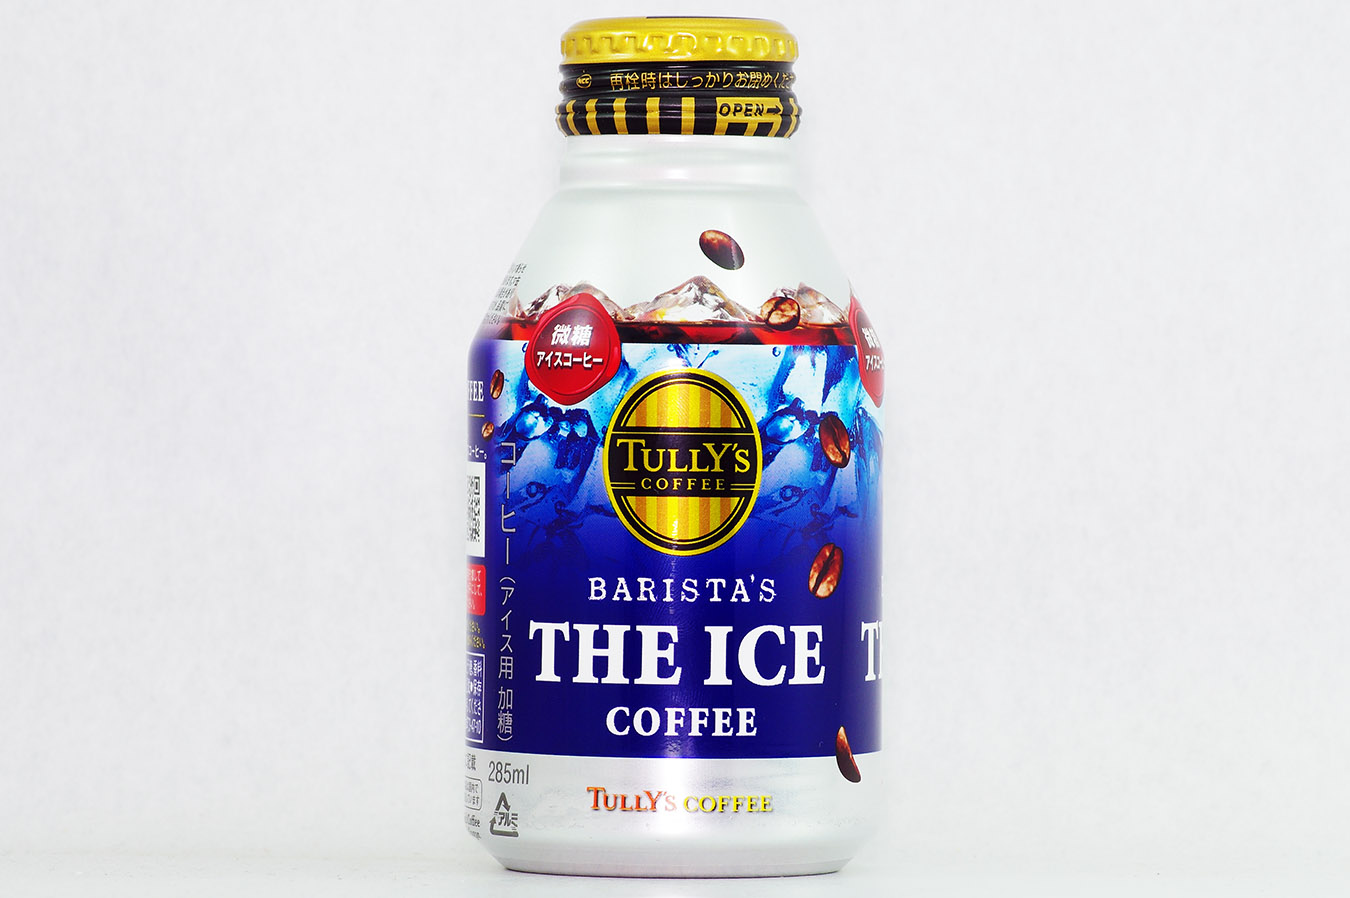 TULLY'S COFFEE BARISTA'S THE ICE COFFEE